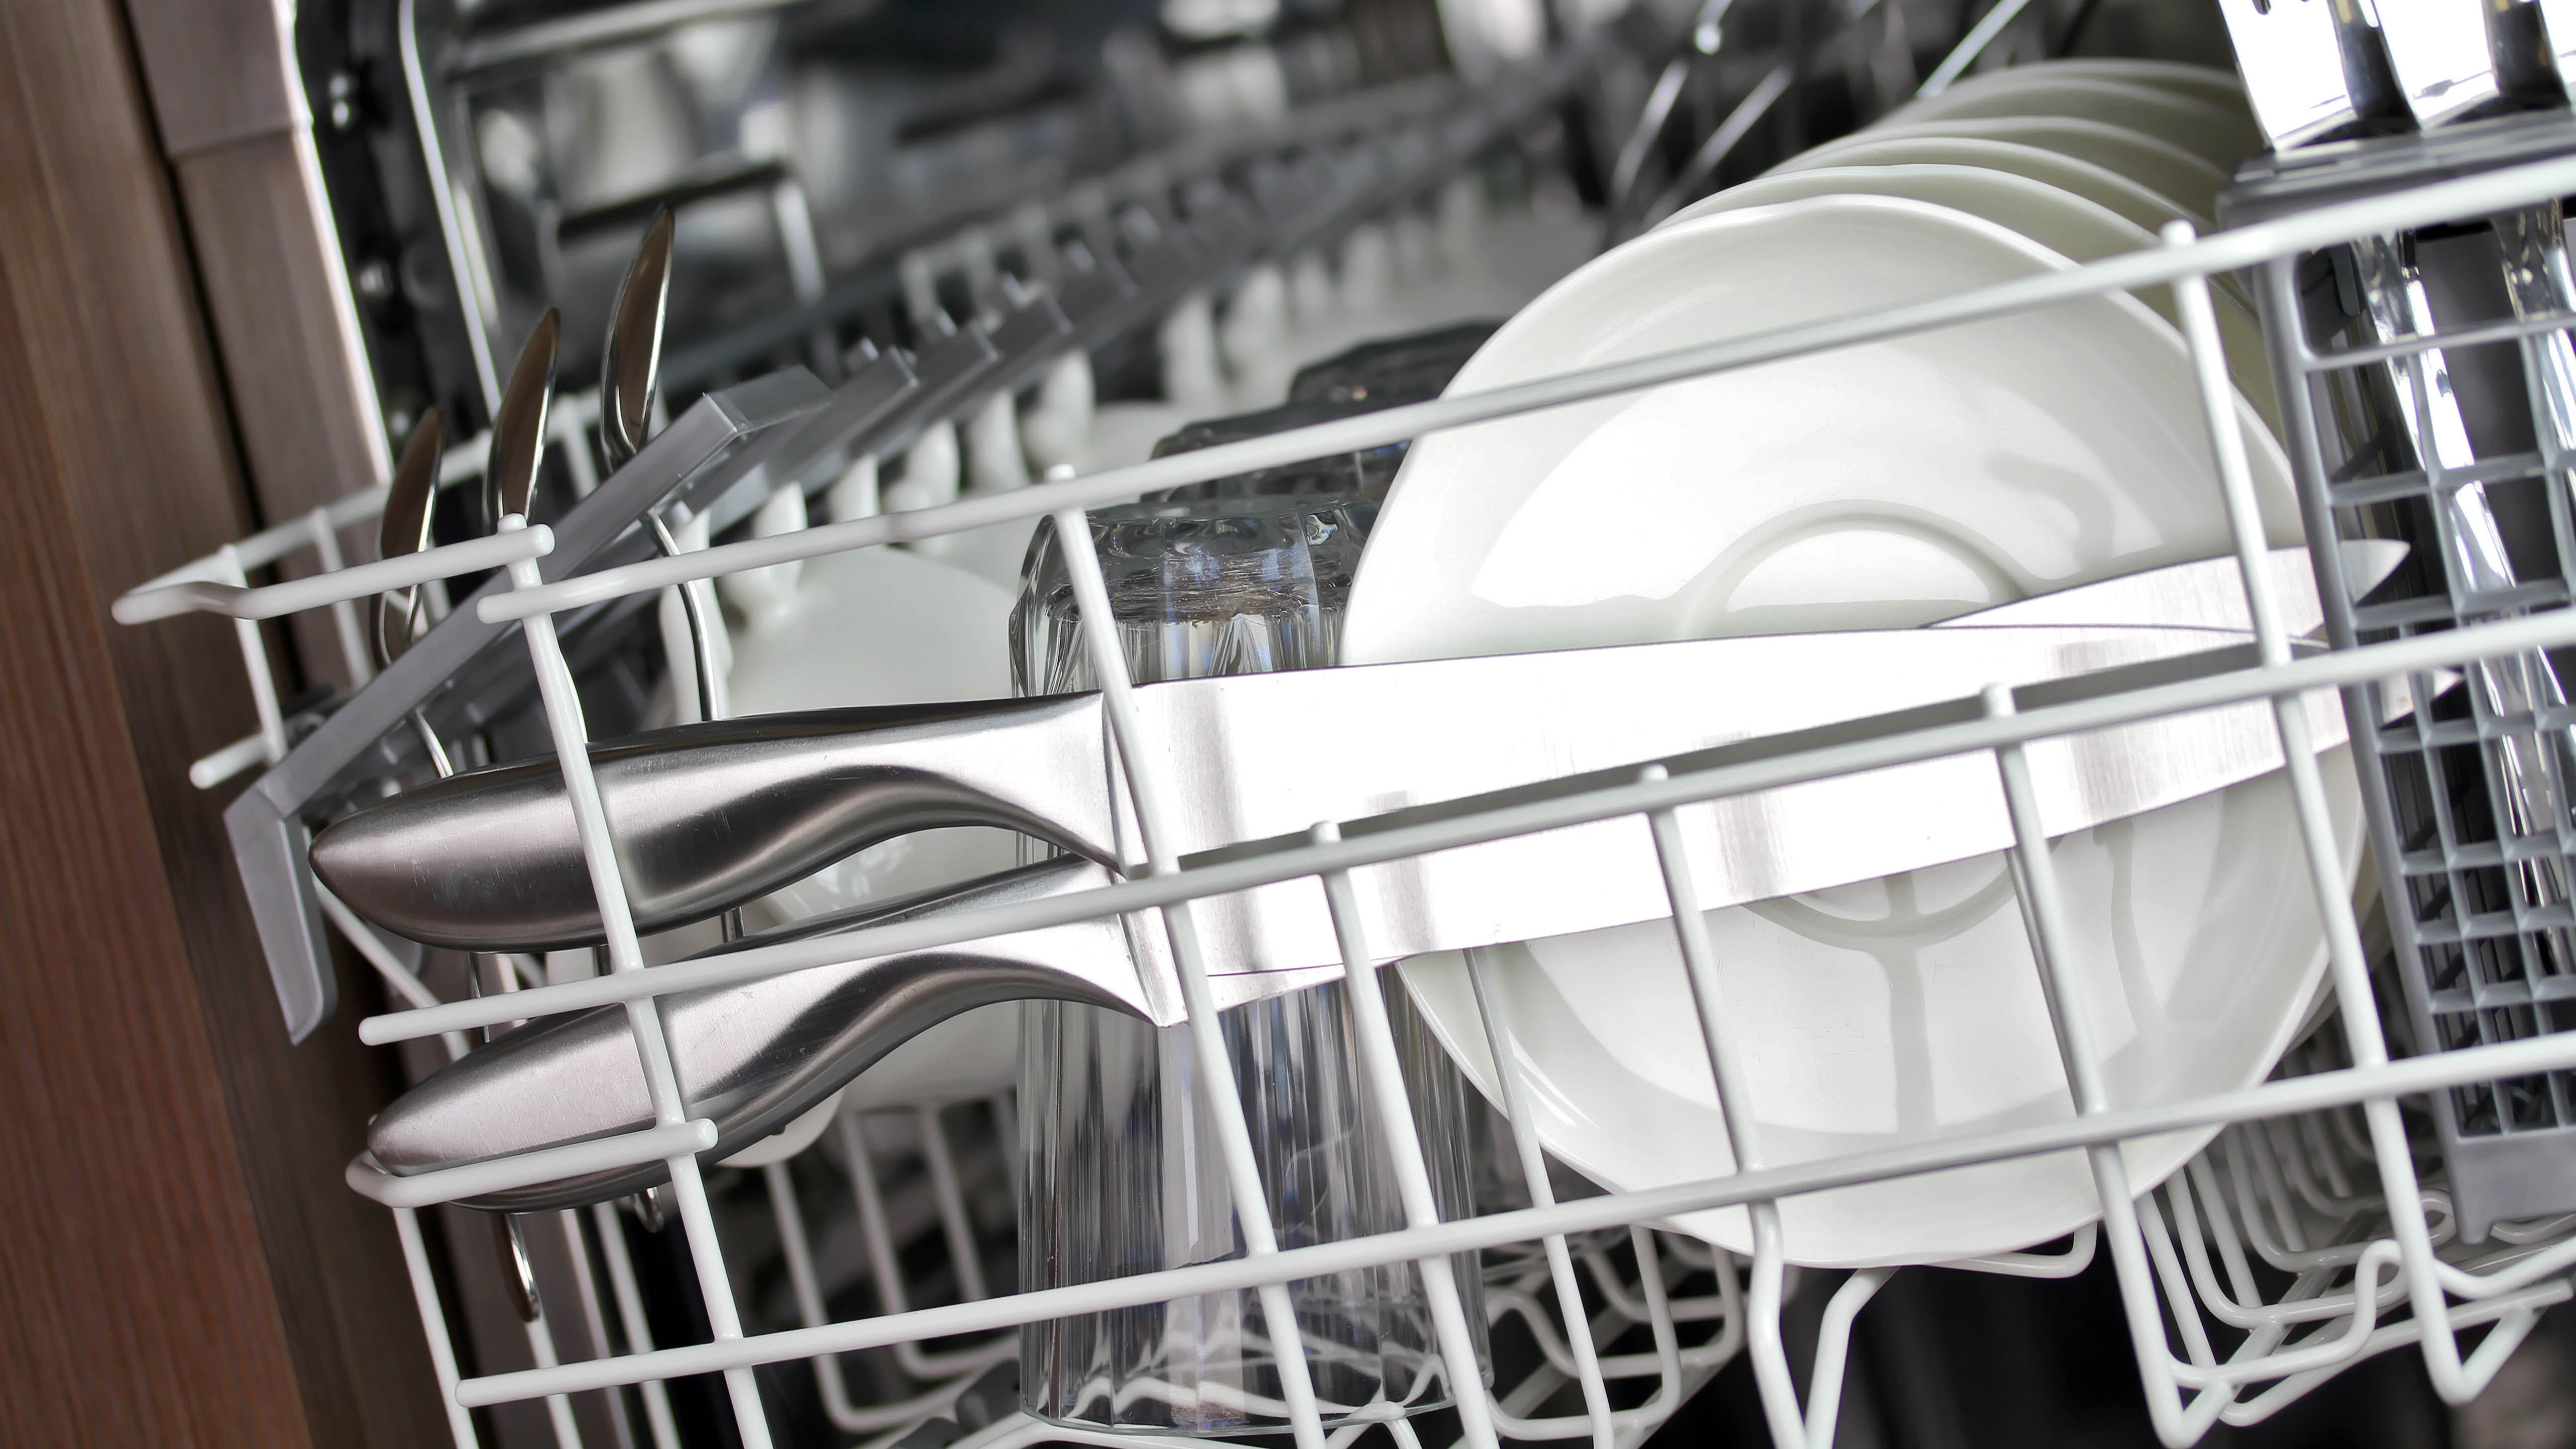 The upper rack of a dishwasher with kitchen knives in it next to plates